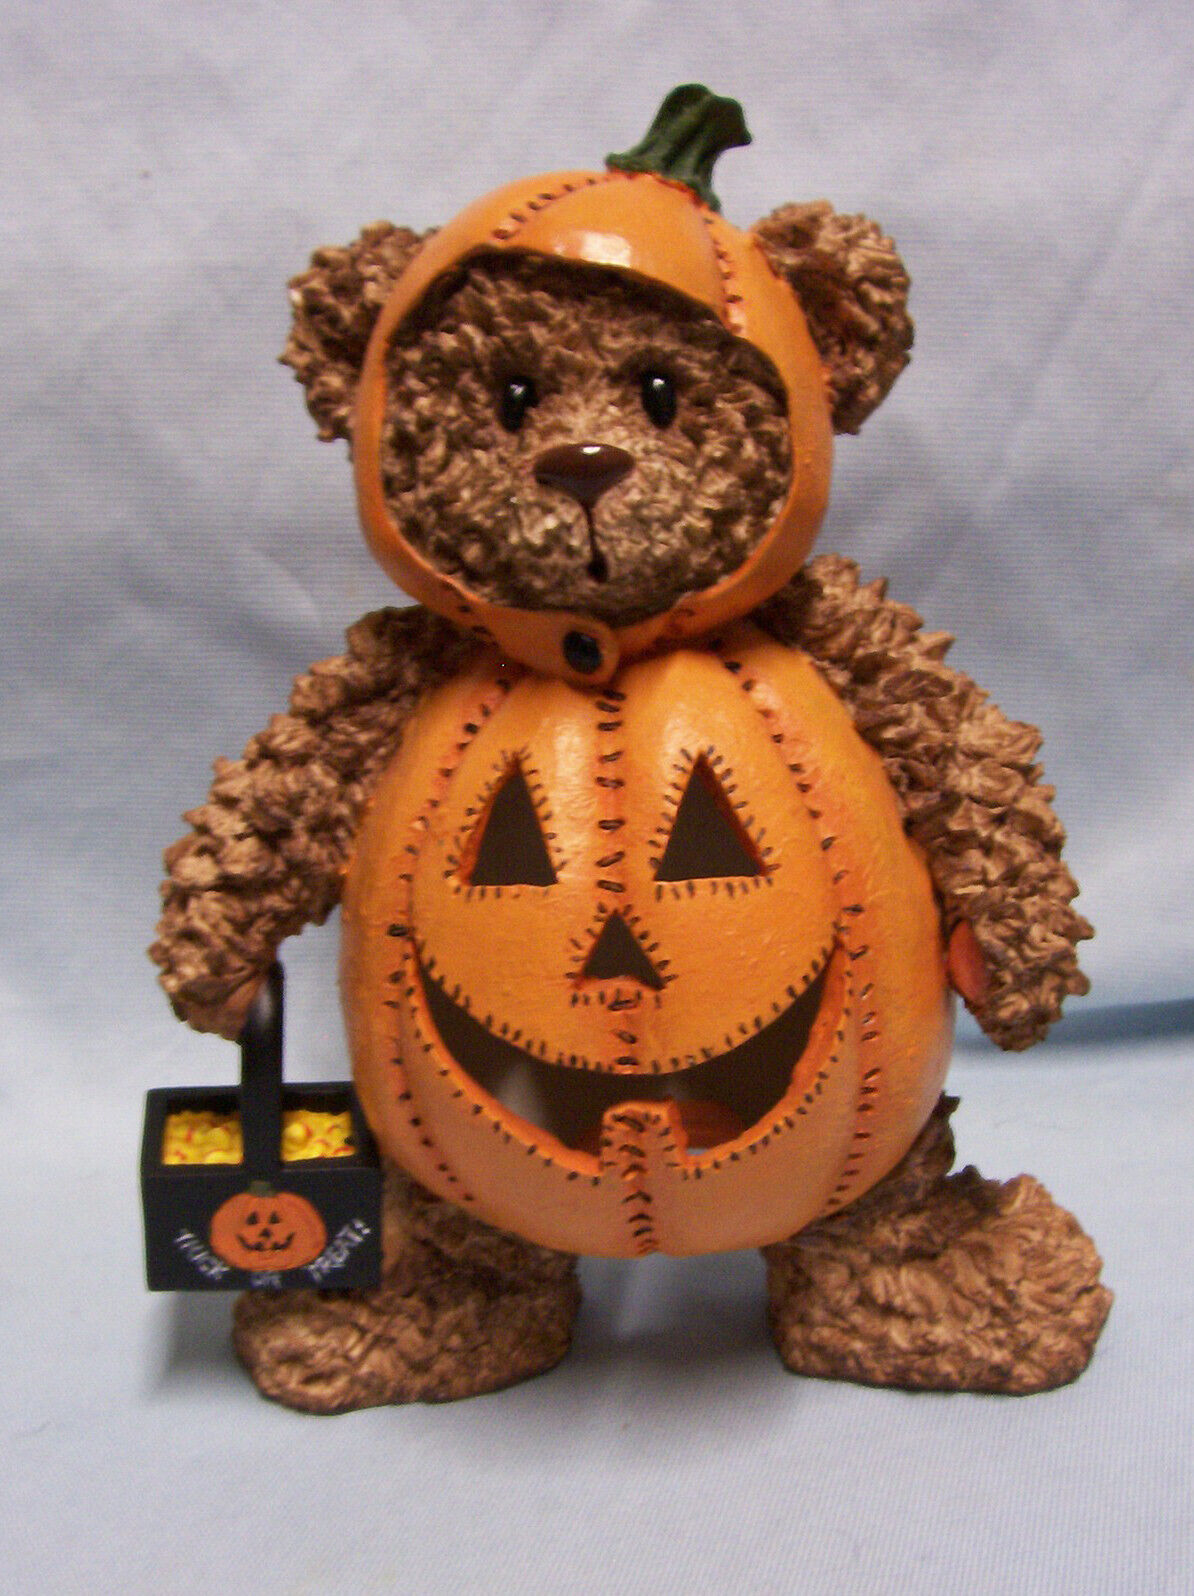 HALLOWEEN LIGHTED TEDDY BEAR in Pumpkin Costume with Trick or Treat Bag  (A1)